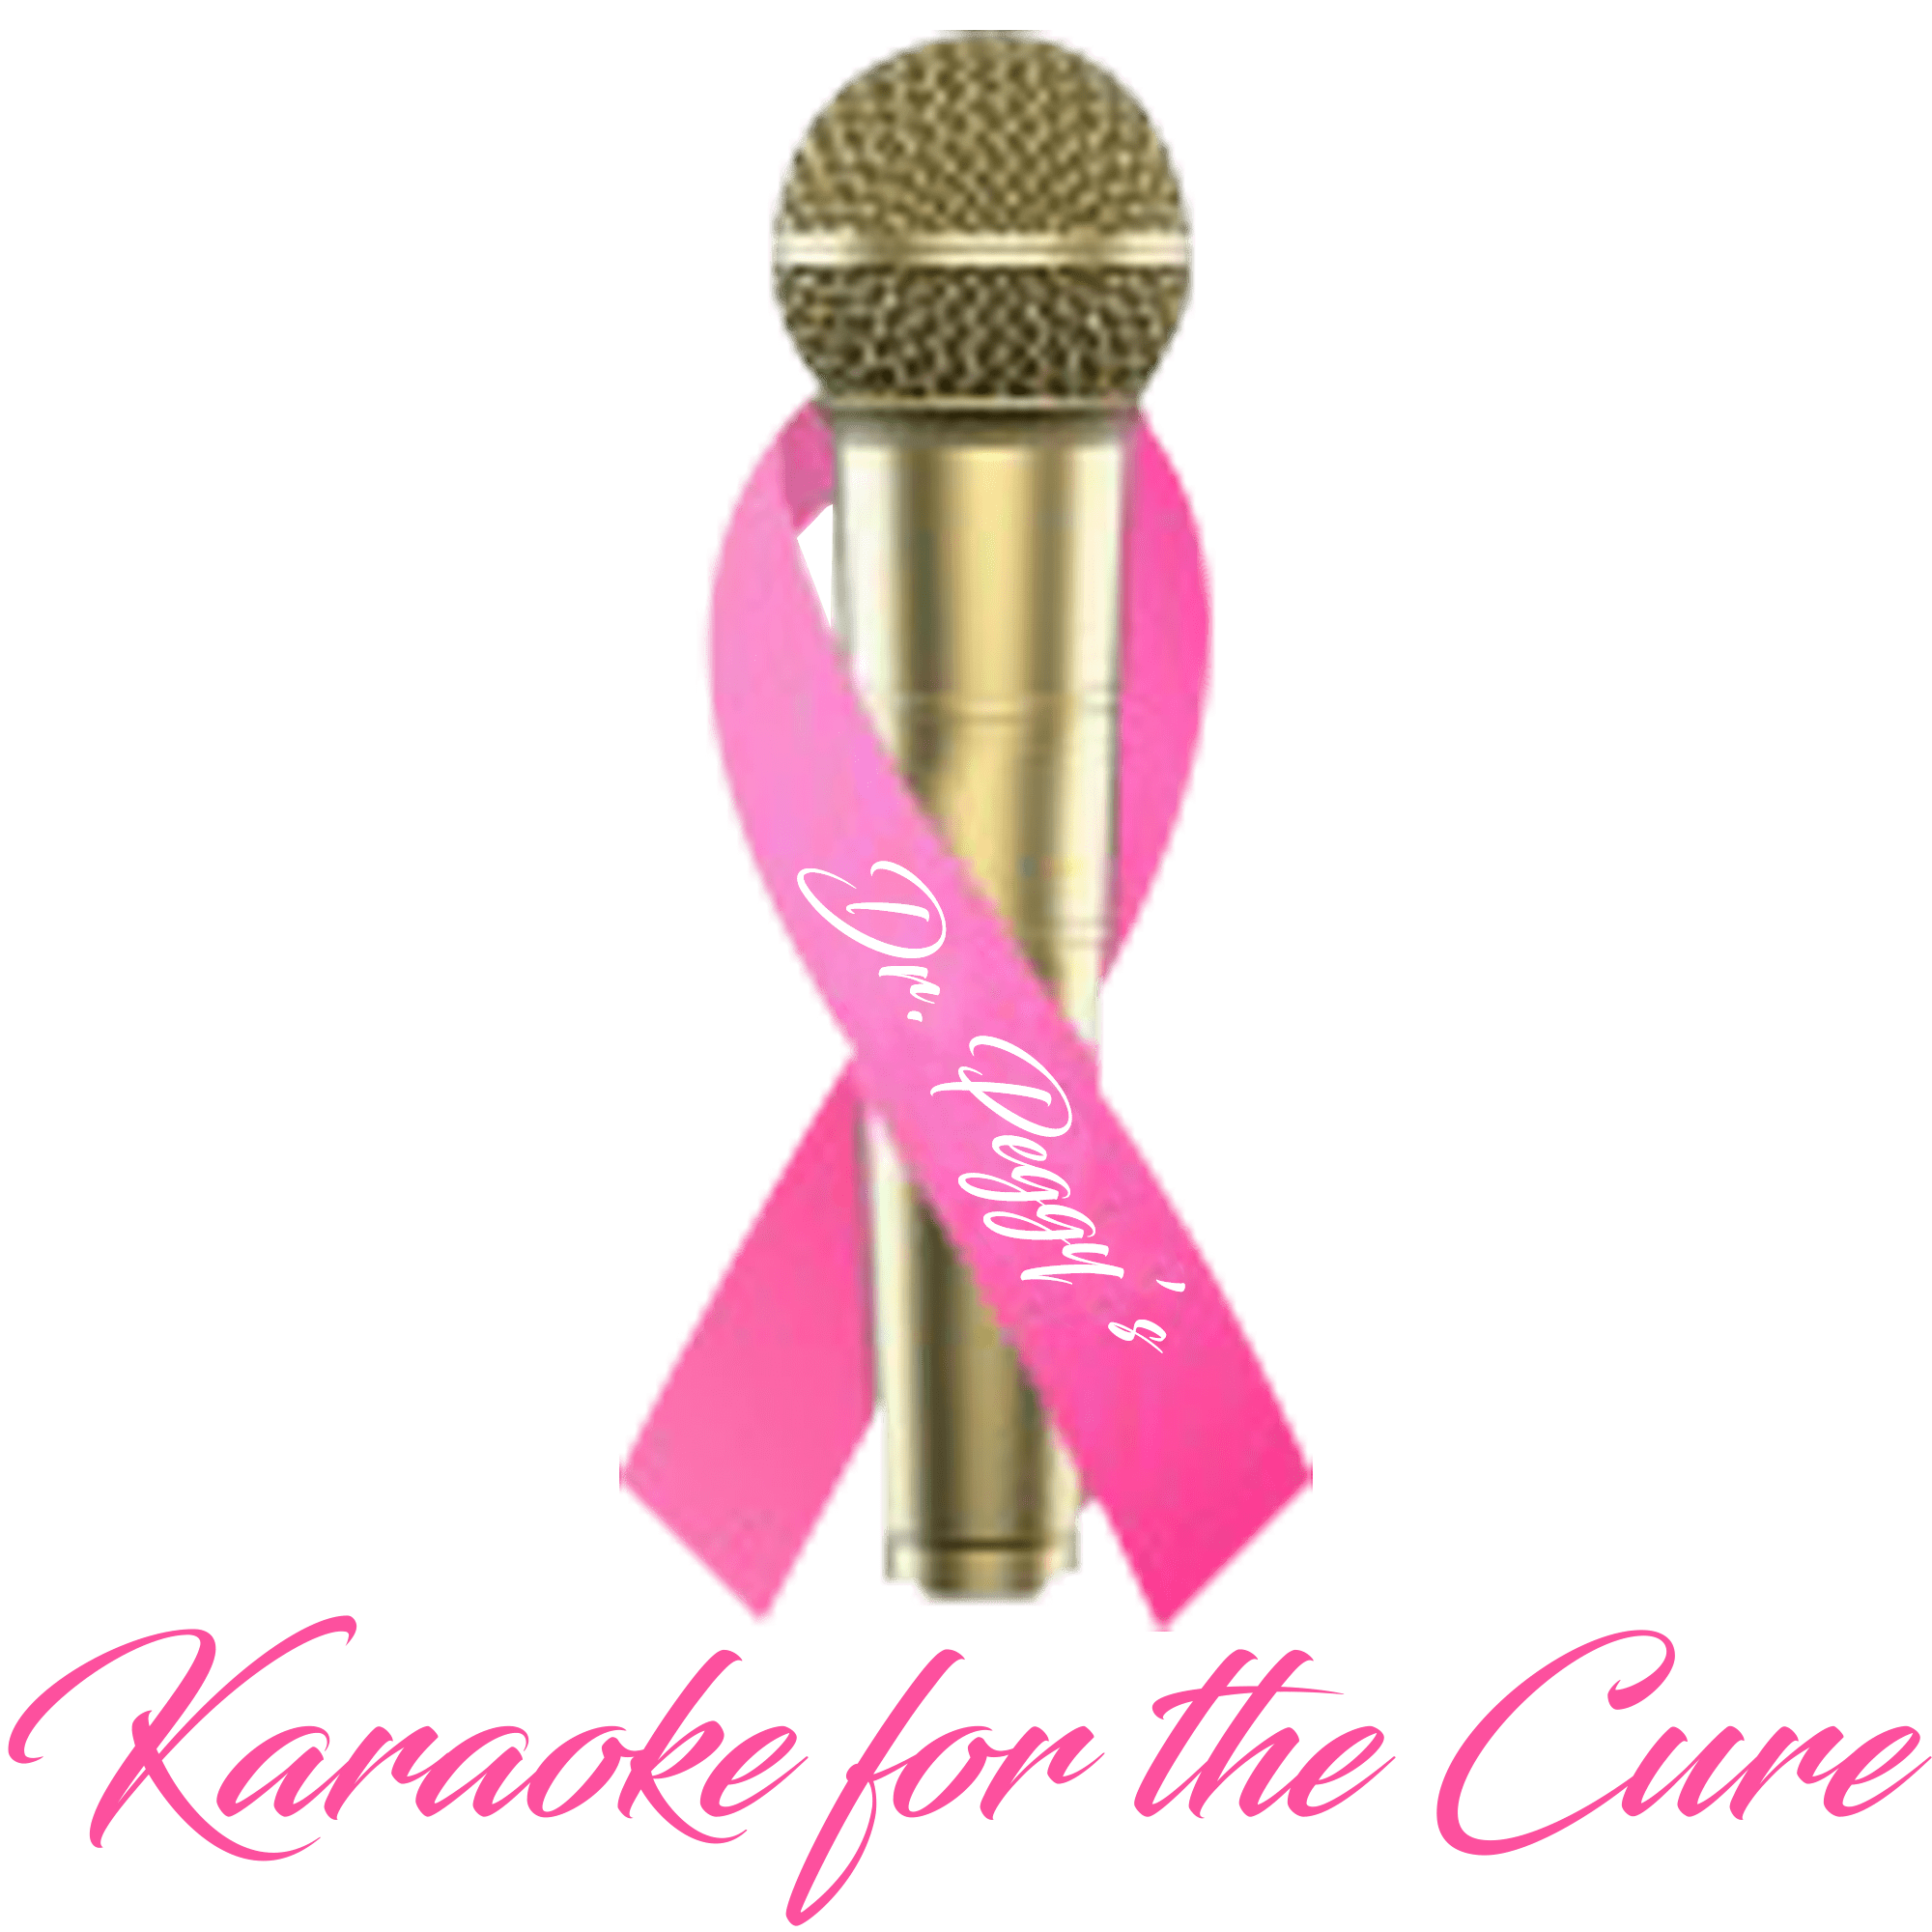 Dr. Peggy's Karaoke For The Cure